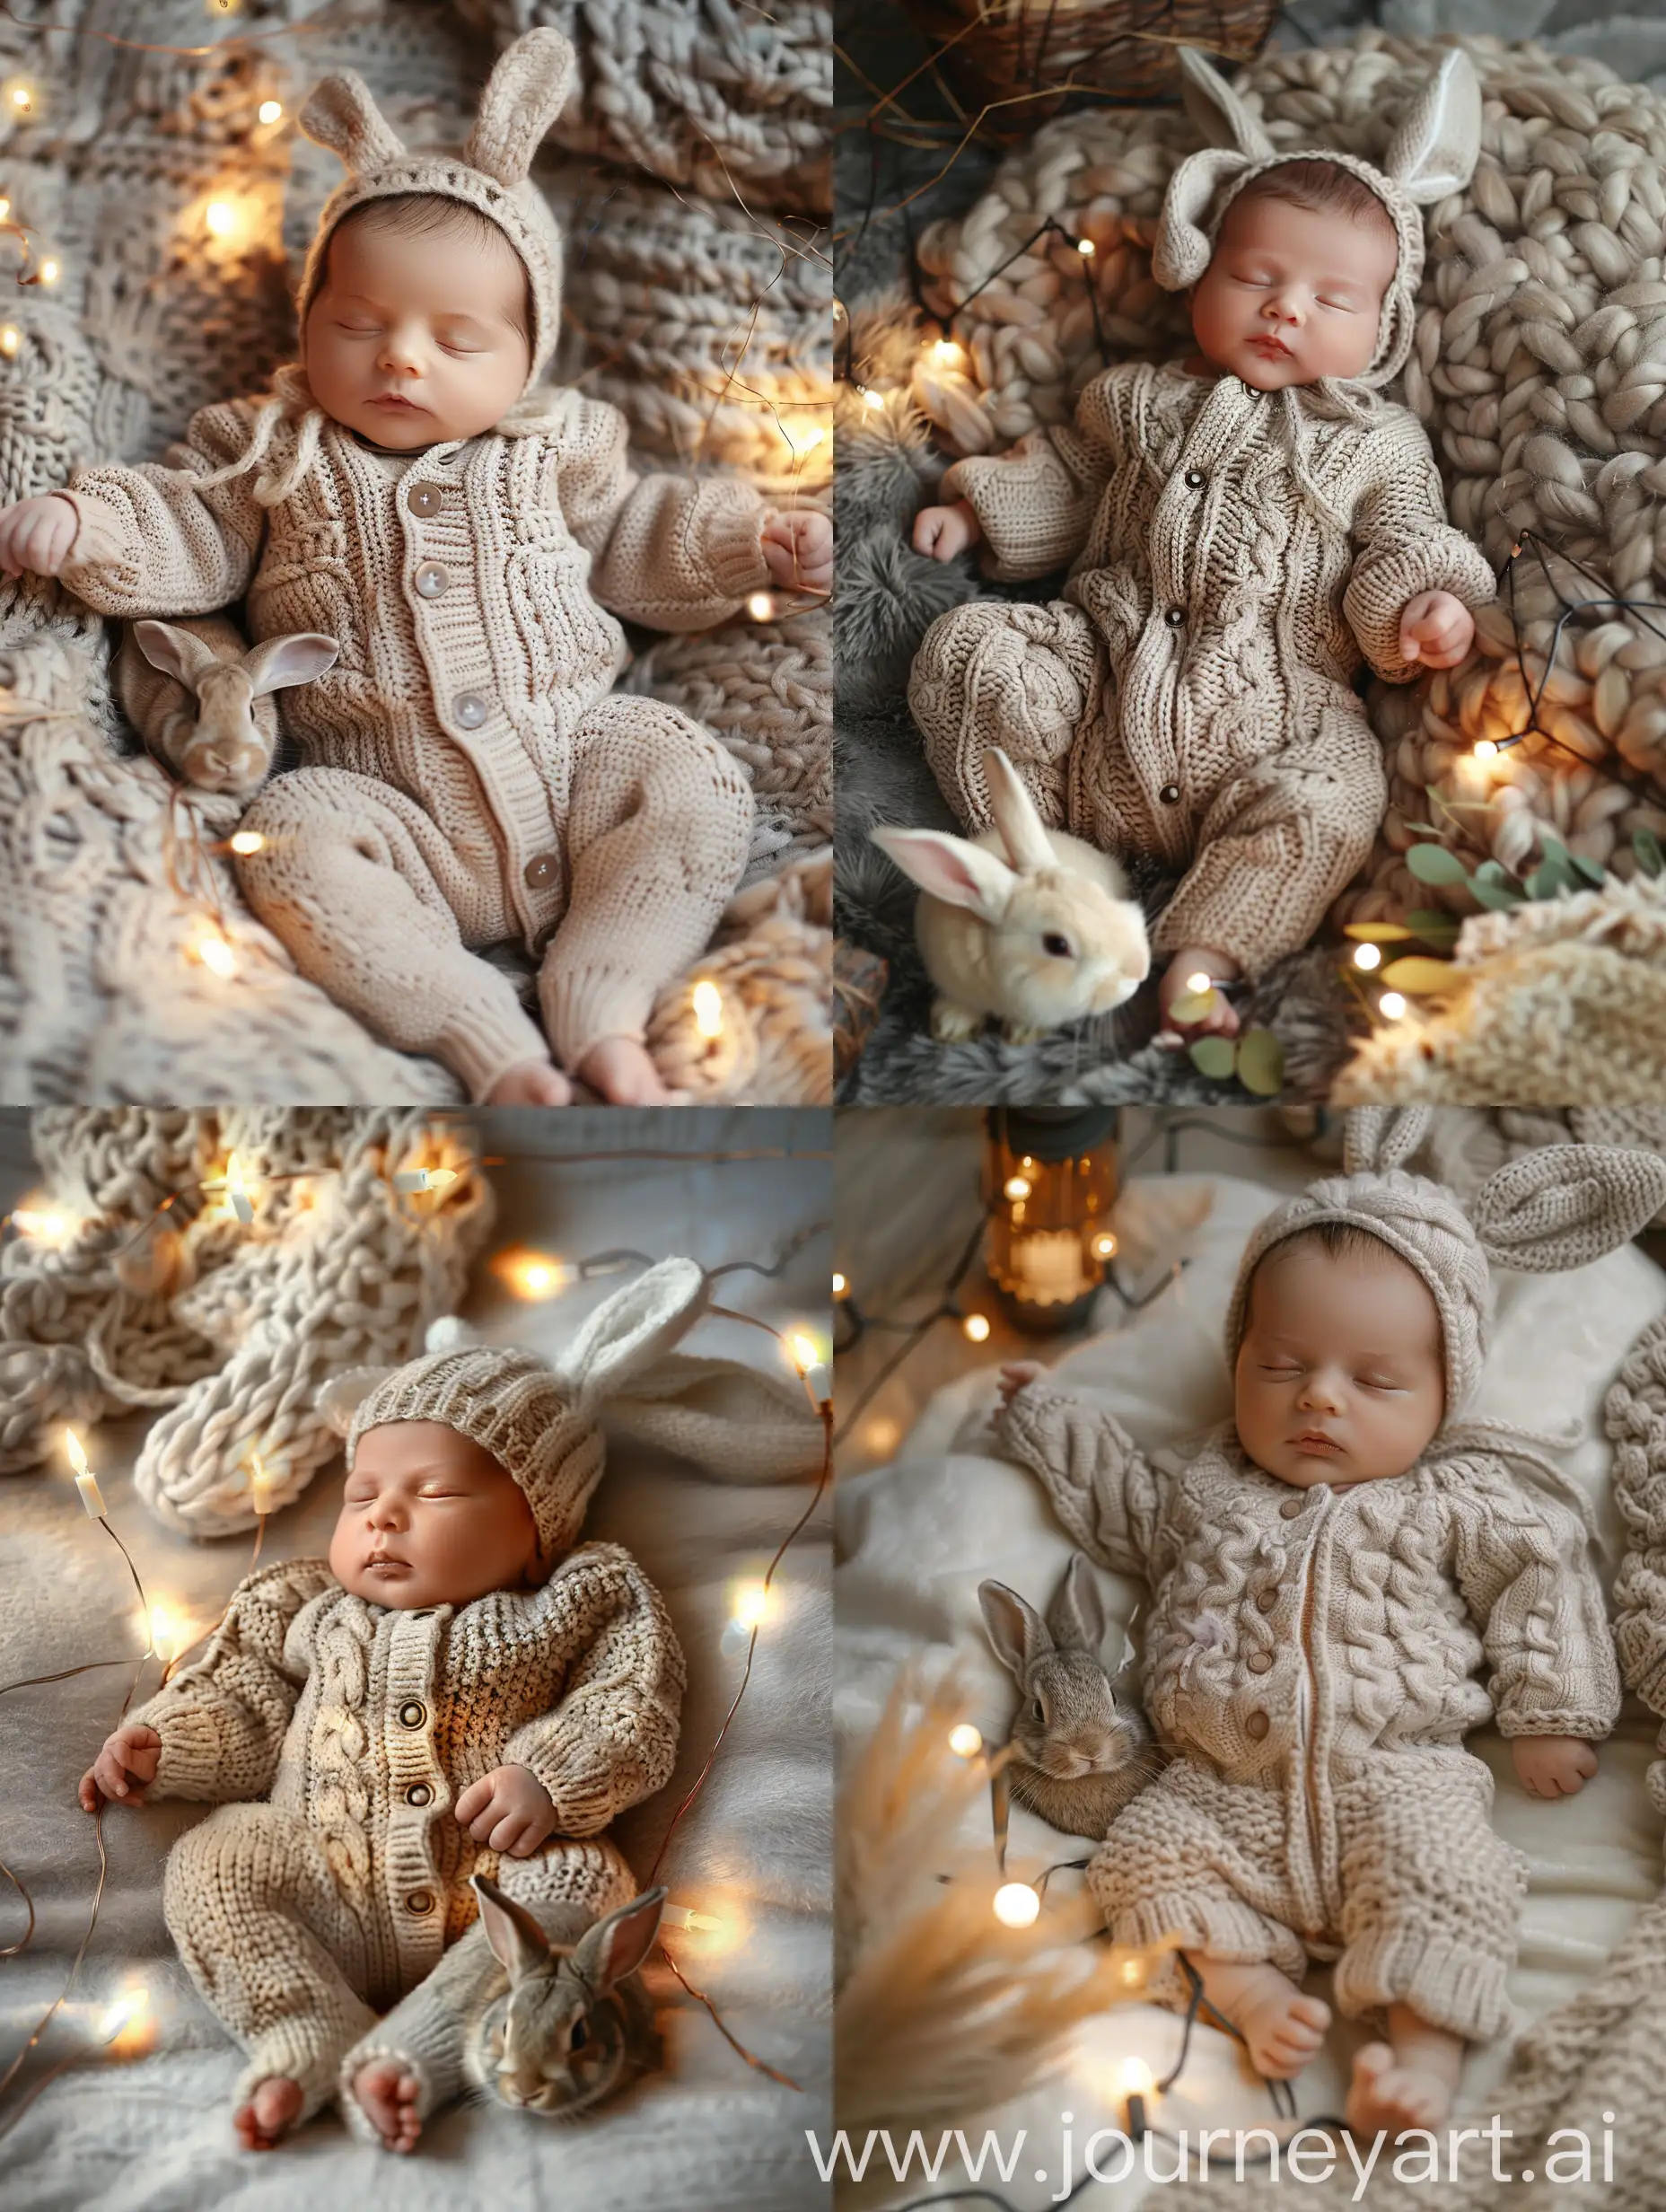 Portrait of a baby in a knitted suit with bunny ears, a small rabbit lies next to it, lights are burning, realistic photo